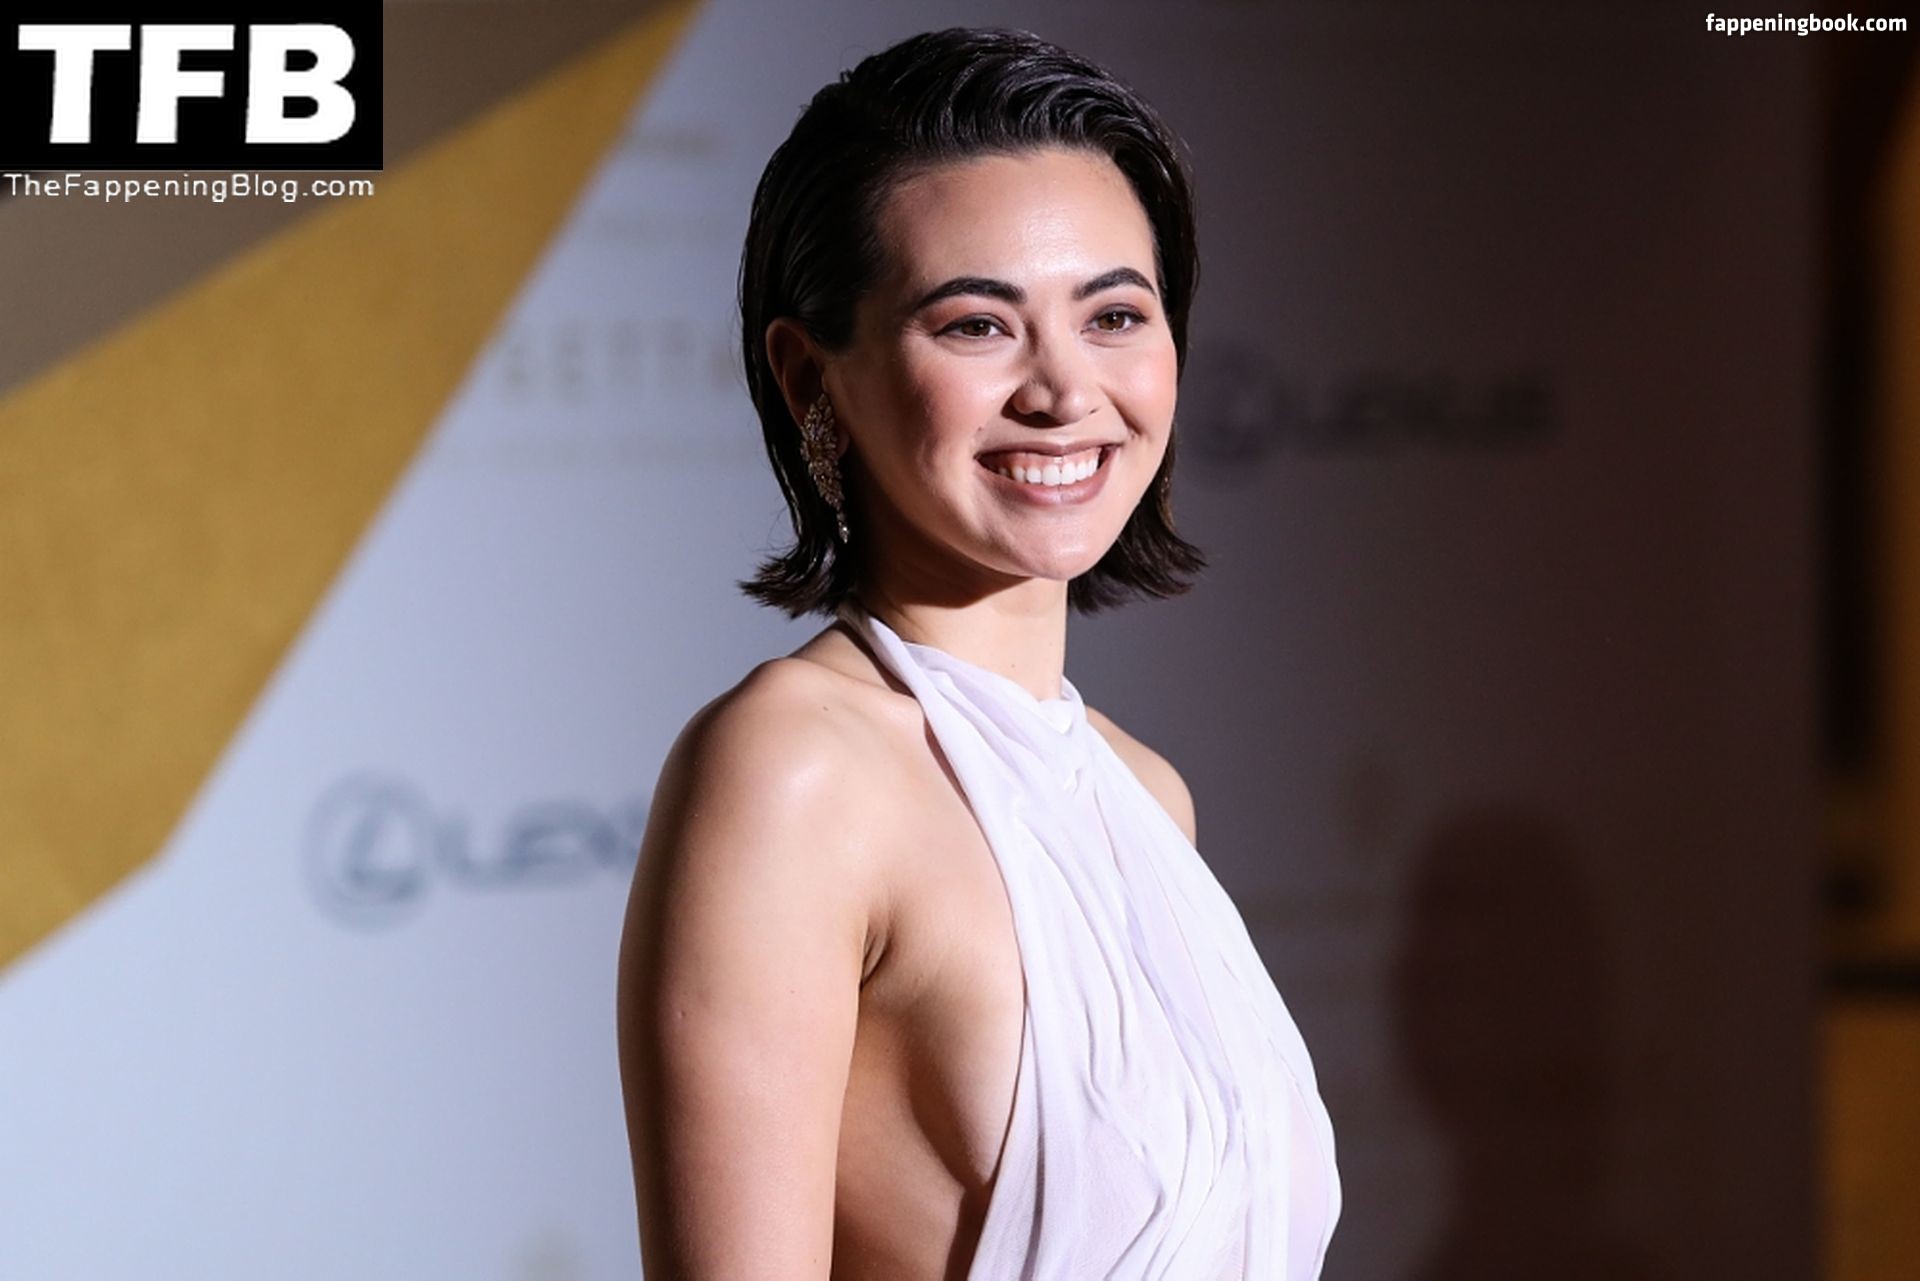 Jessica Henwick Nude, The Fappening - Photo #1482950 - FappeningBook.